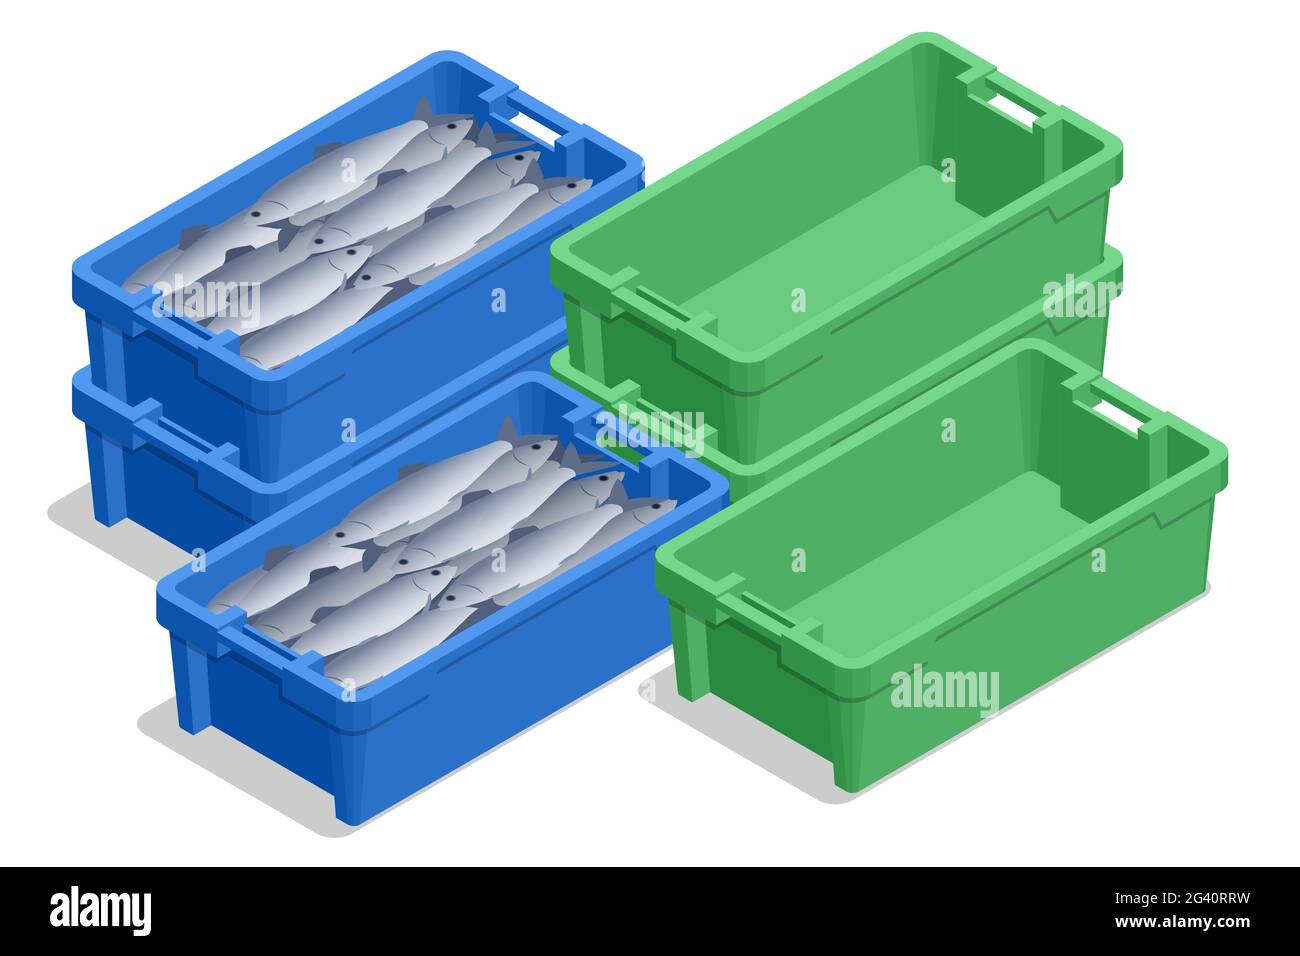 Fishing crate Stock Vector Images - Alamy